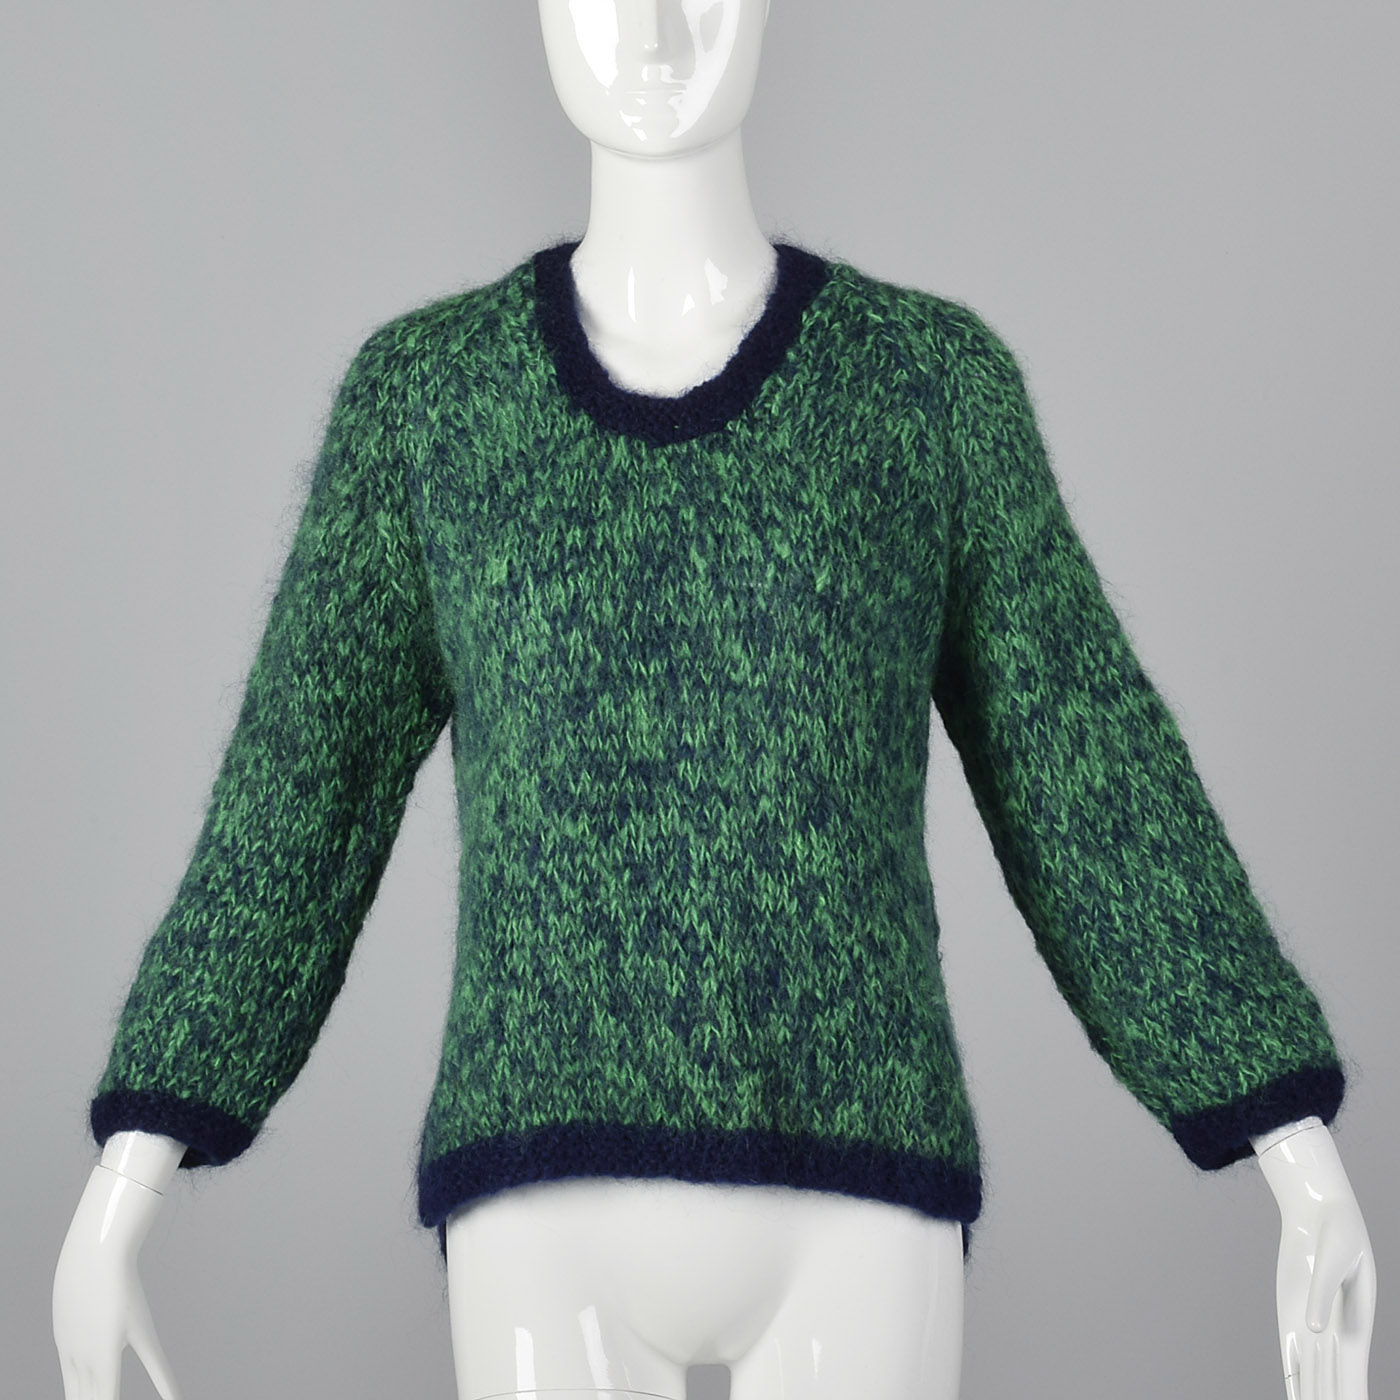 1950s Hand Knit Mohair Sweater in Green and Navy